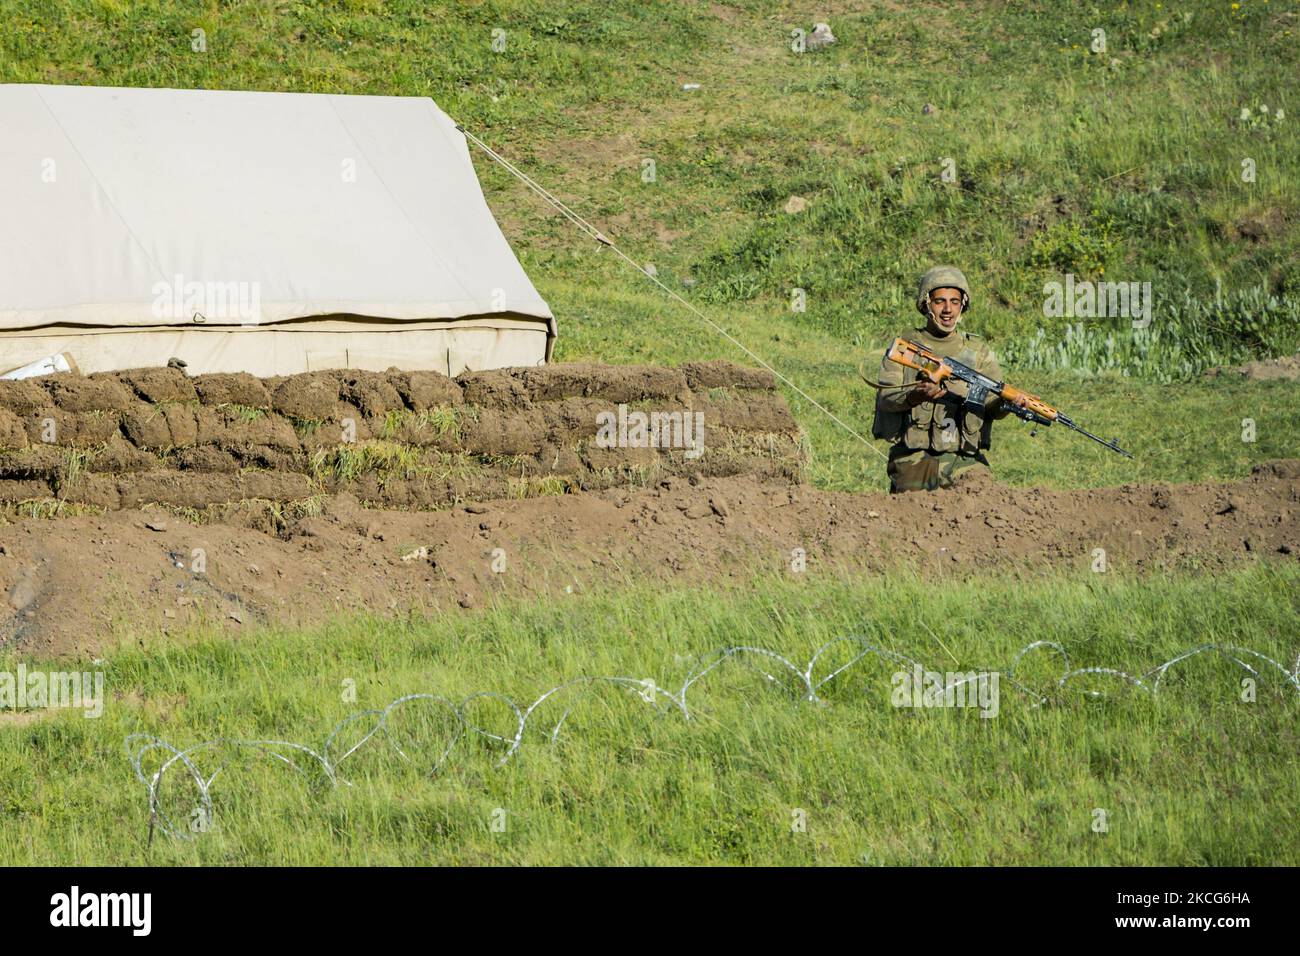 Azeri soldier prepares and charges his sniper rifle in an advanced detachment inside the armenian territory in the Gegharkunik province, Armenia. Azerbaijan army is interned some kilometers from the oficial border between Armenia and Azerbaijan. Distances between soldiers are only 50 meters in some cases. (Photo by Celestino Arce/NurPhoto) Stock Photo